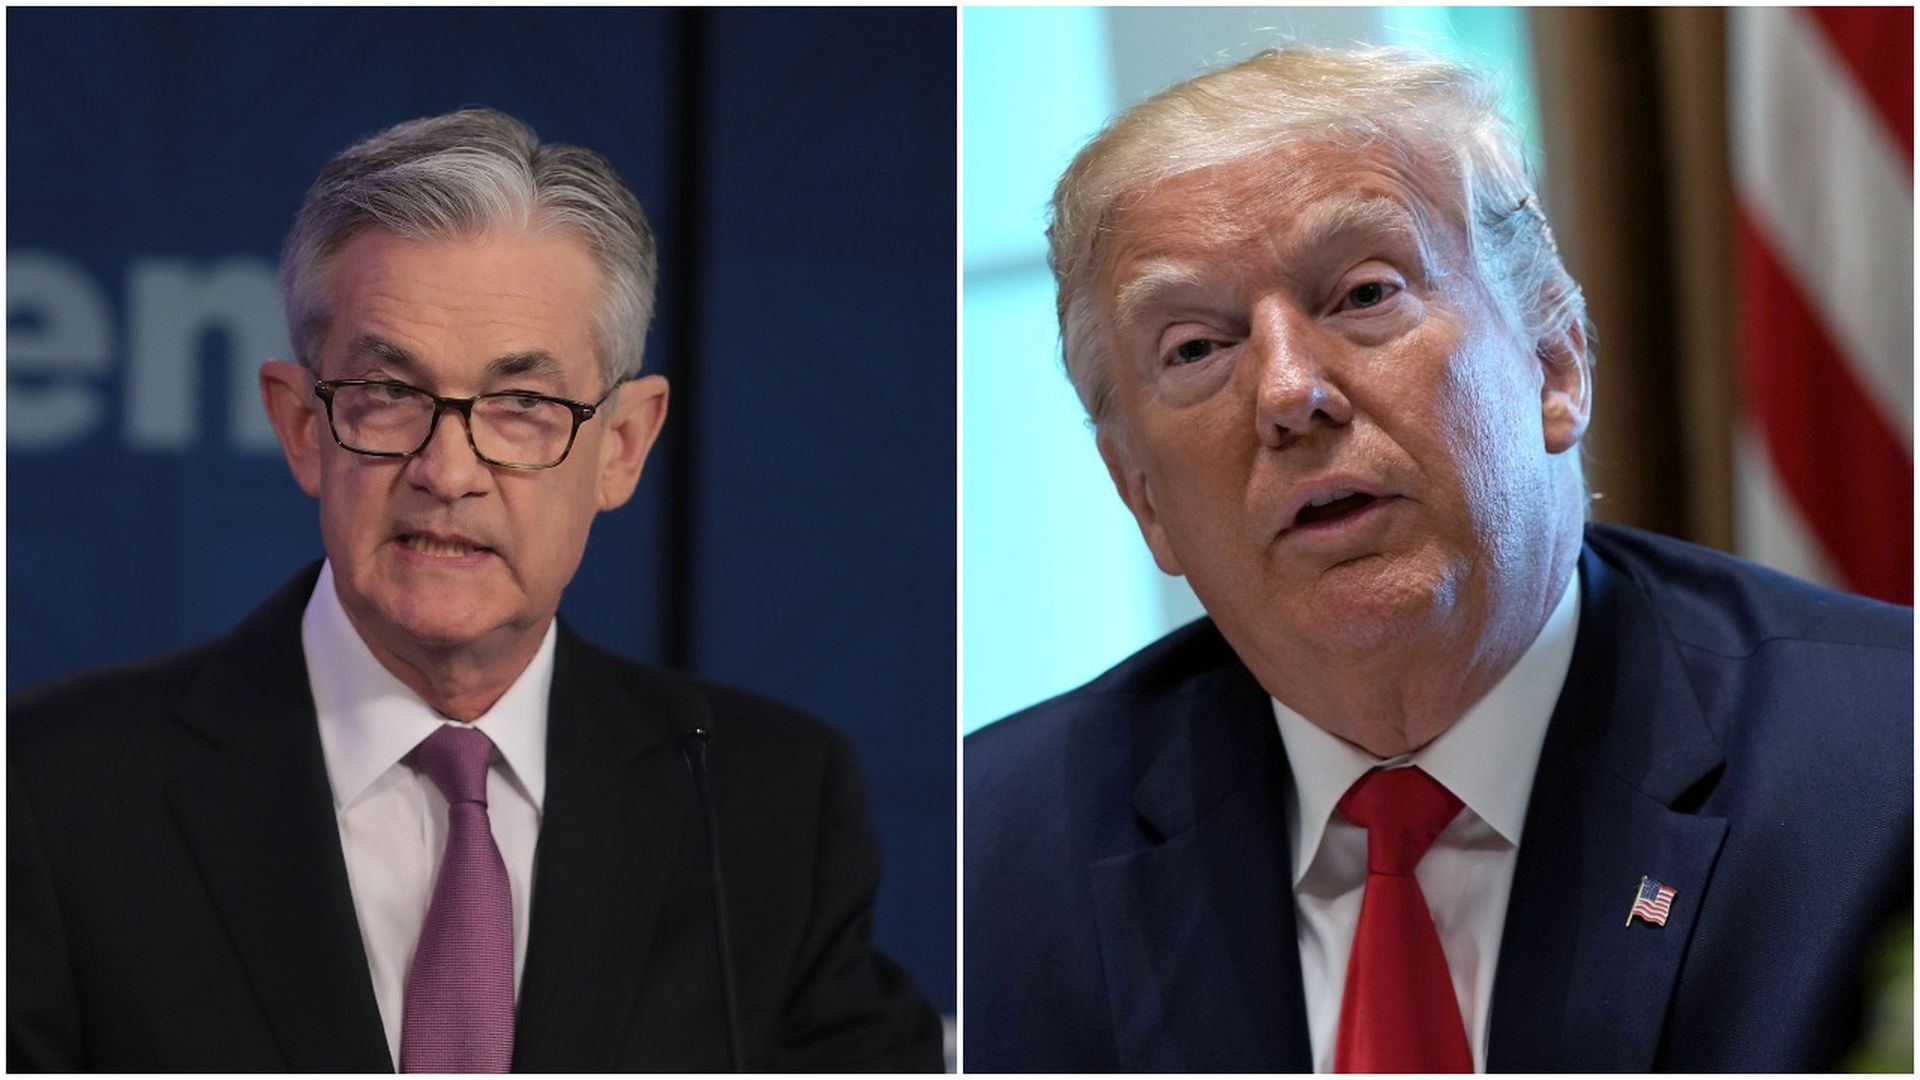 This image is a two-way splitscreen between Powell and Trump.